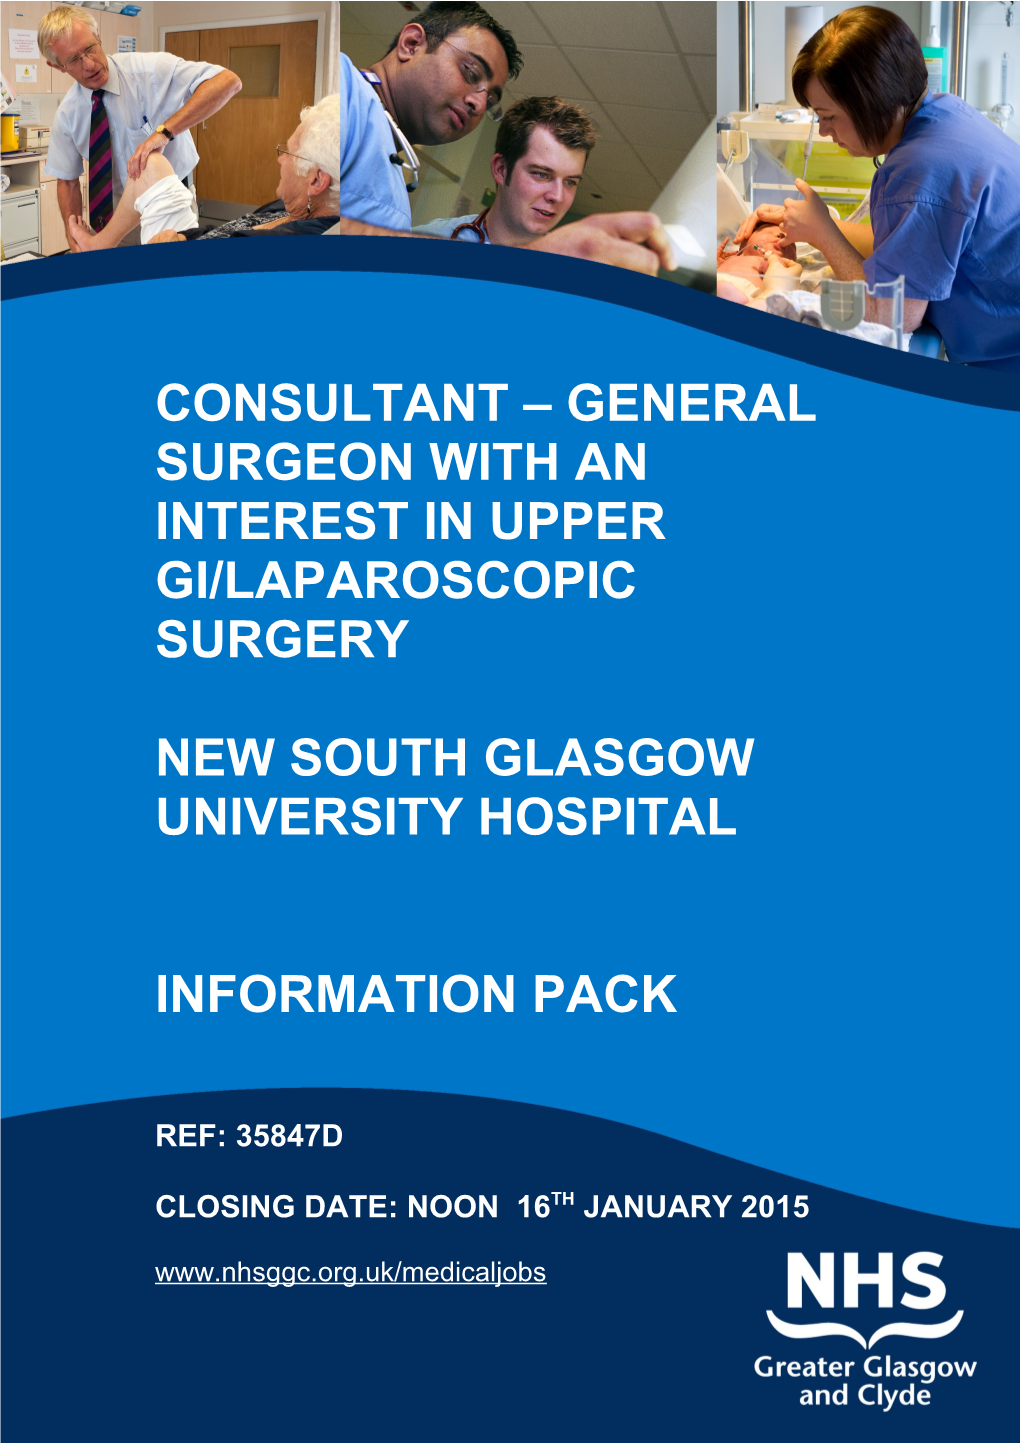 CONSULTANT General Surgeon with an Interest in Upper Gi/Laparoscopic Surgery